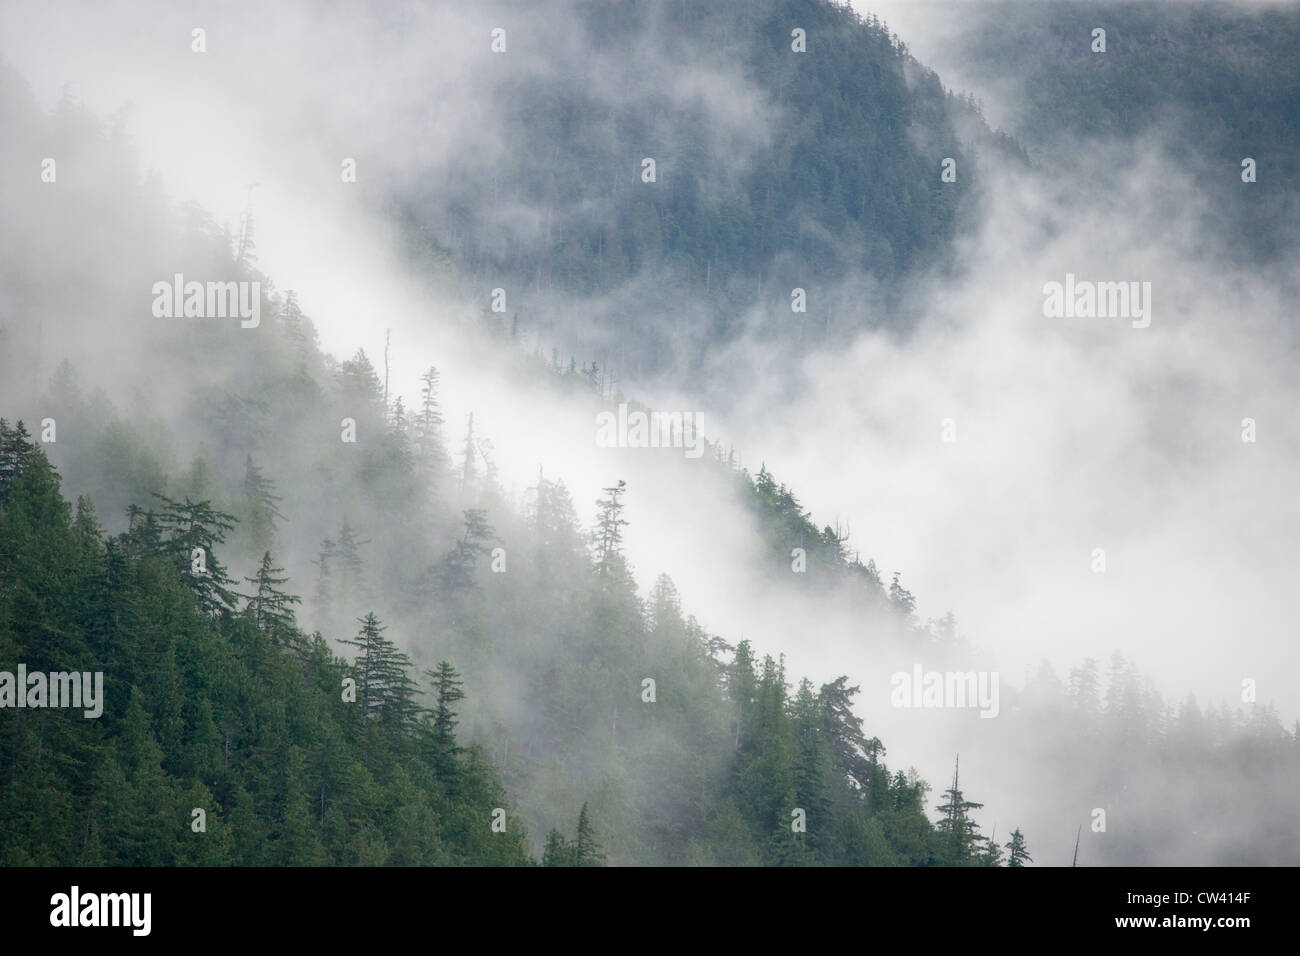 Fog over trees in a rainforest, Great Bear Rainforest, British Columbia, Canada Stock Photo